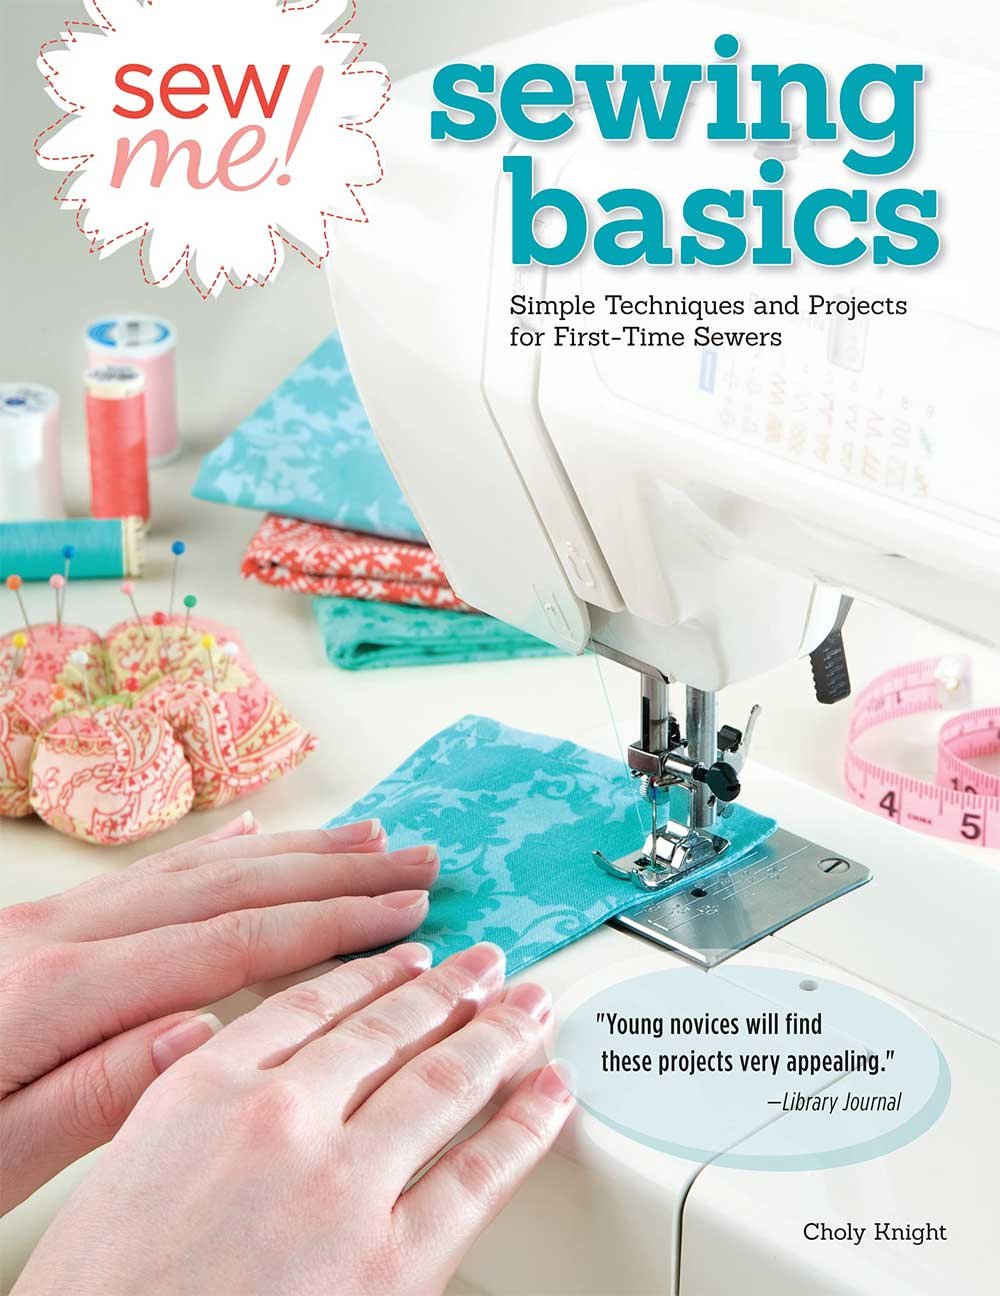 Sew Me! Sewing Basics is the perfect book for anyone who wants get started sewing.